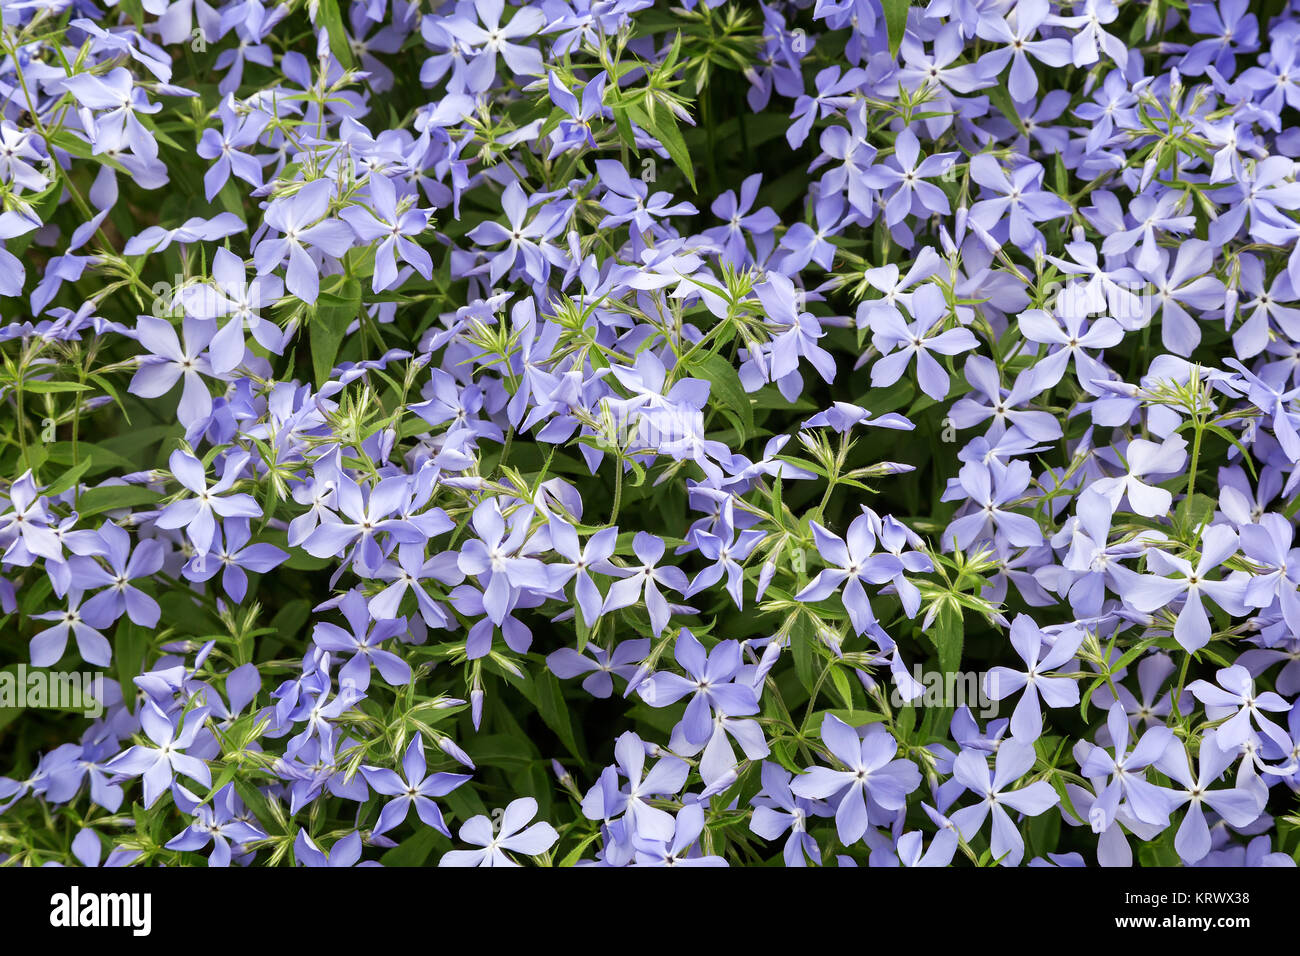 In the flower bed bloom a beautiful small blue flowers violets among the green leaves. Stock Photo